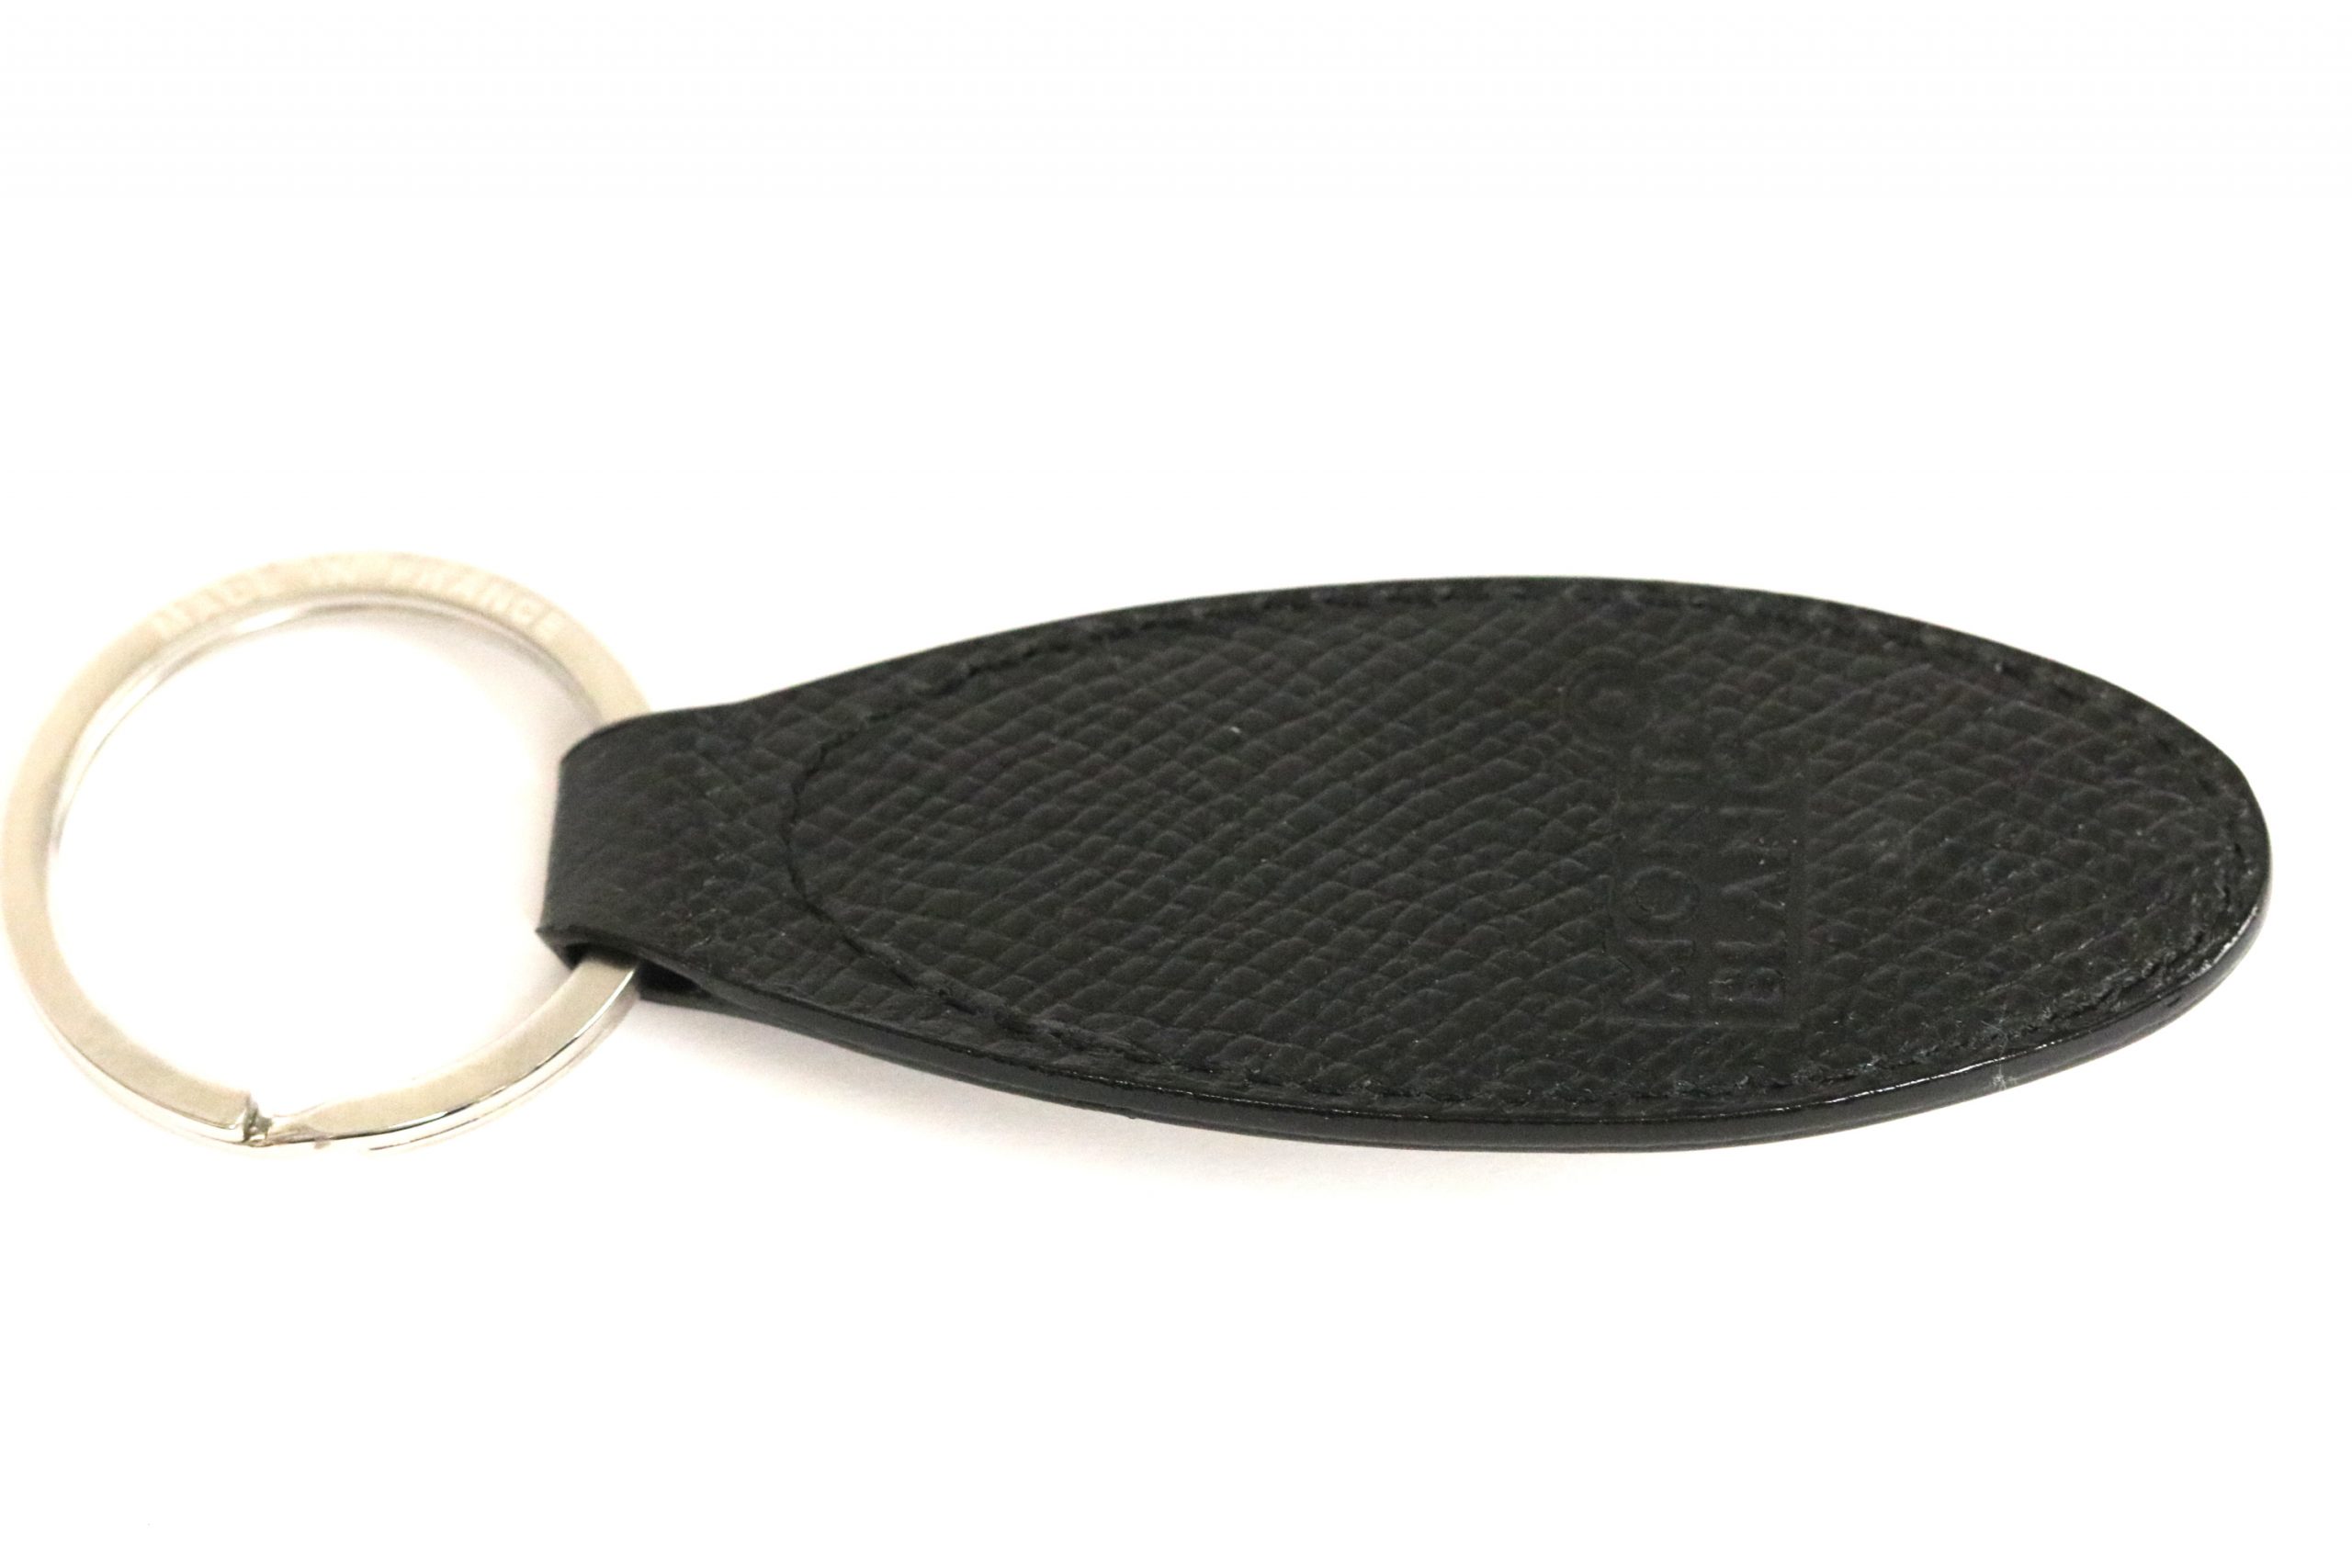 Montblanc Diaries & Notes Triangle Black Leather Key Fob Keyring 101783 - Preowned